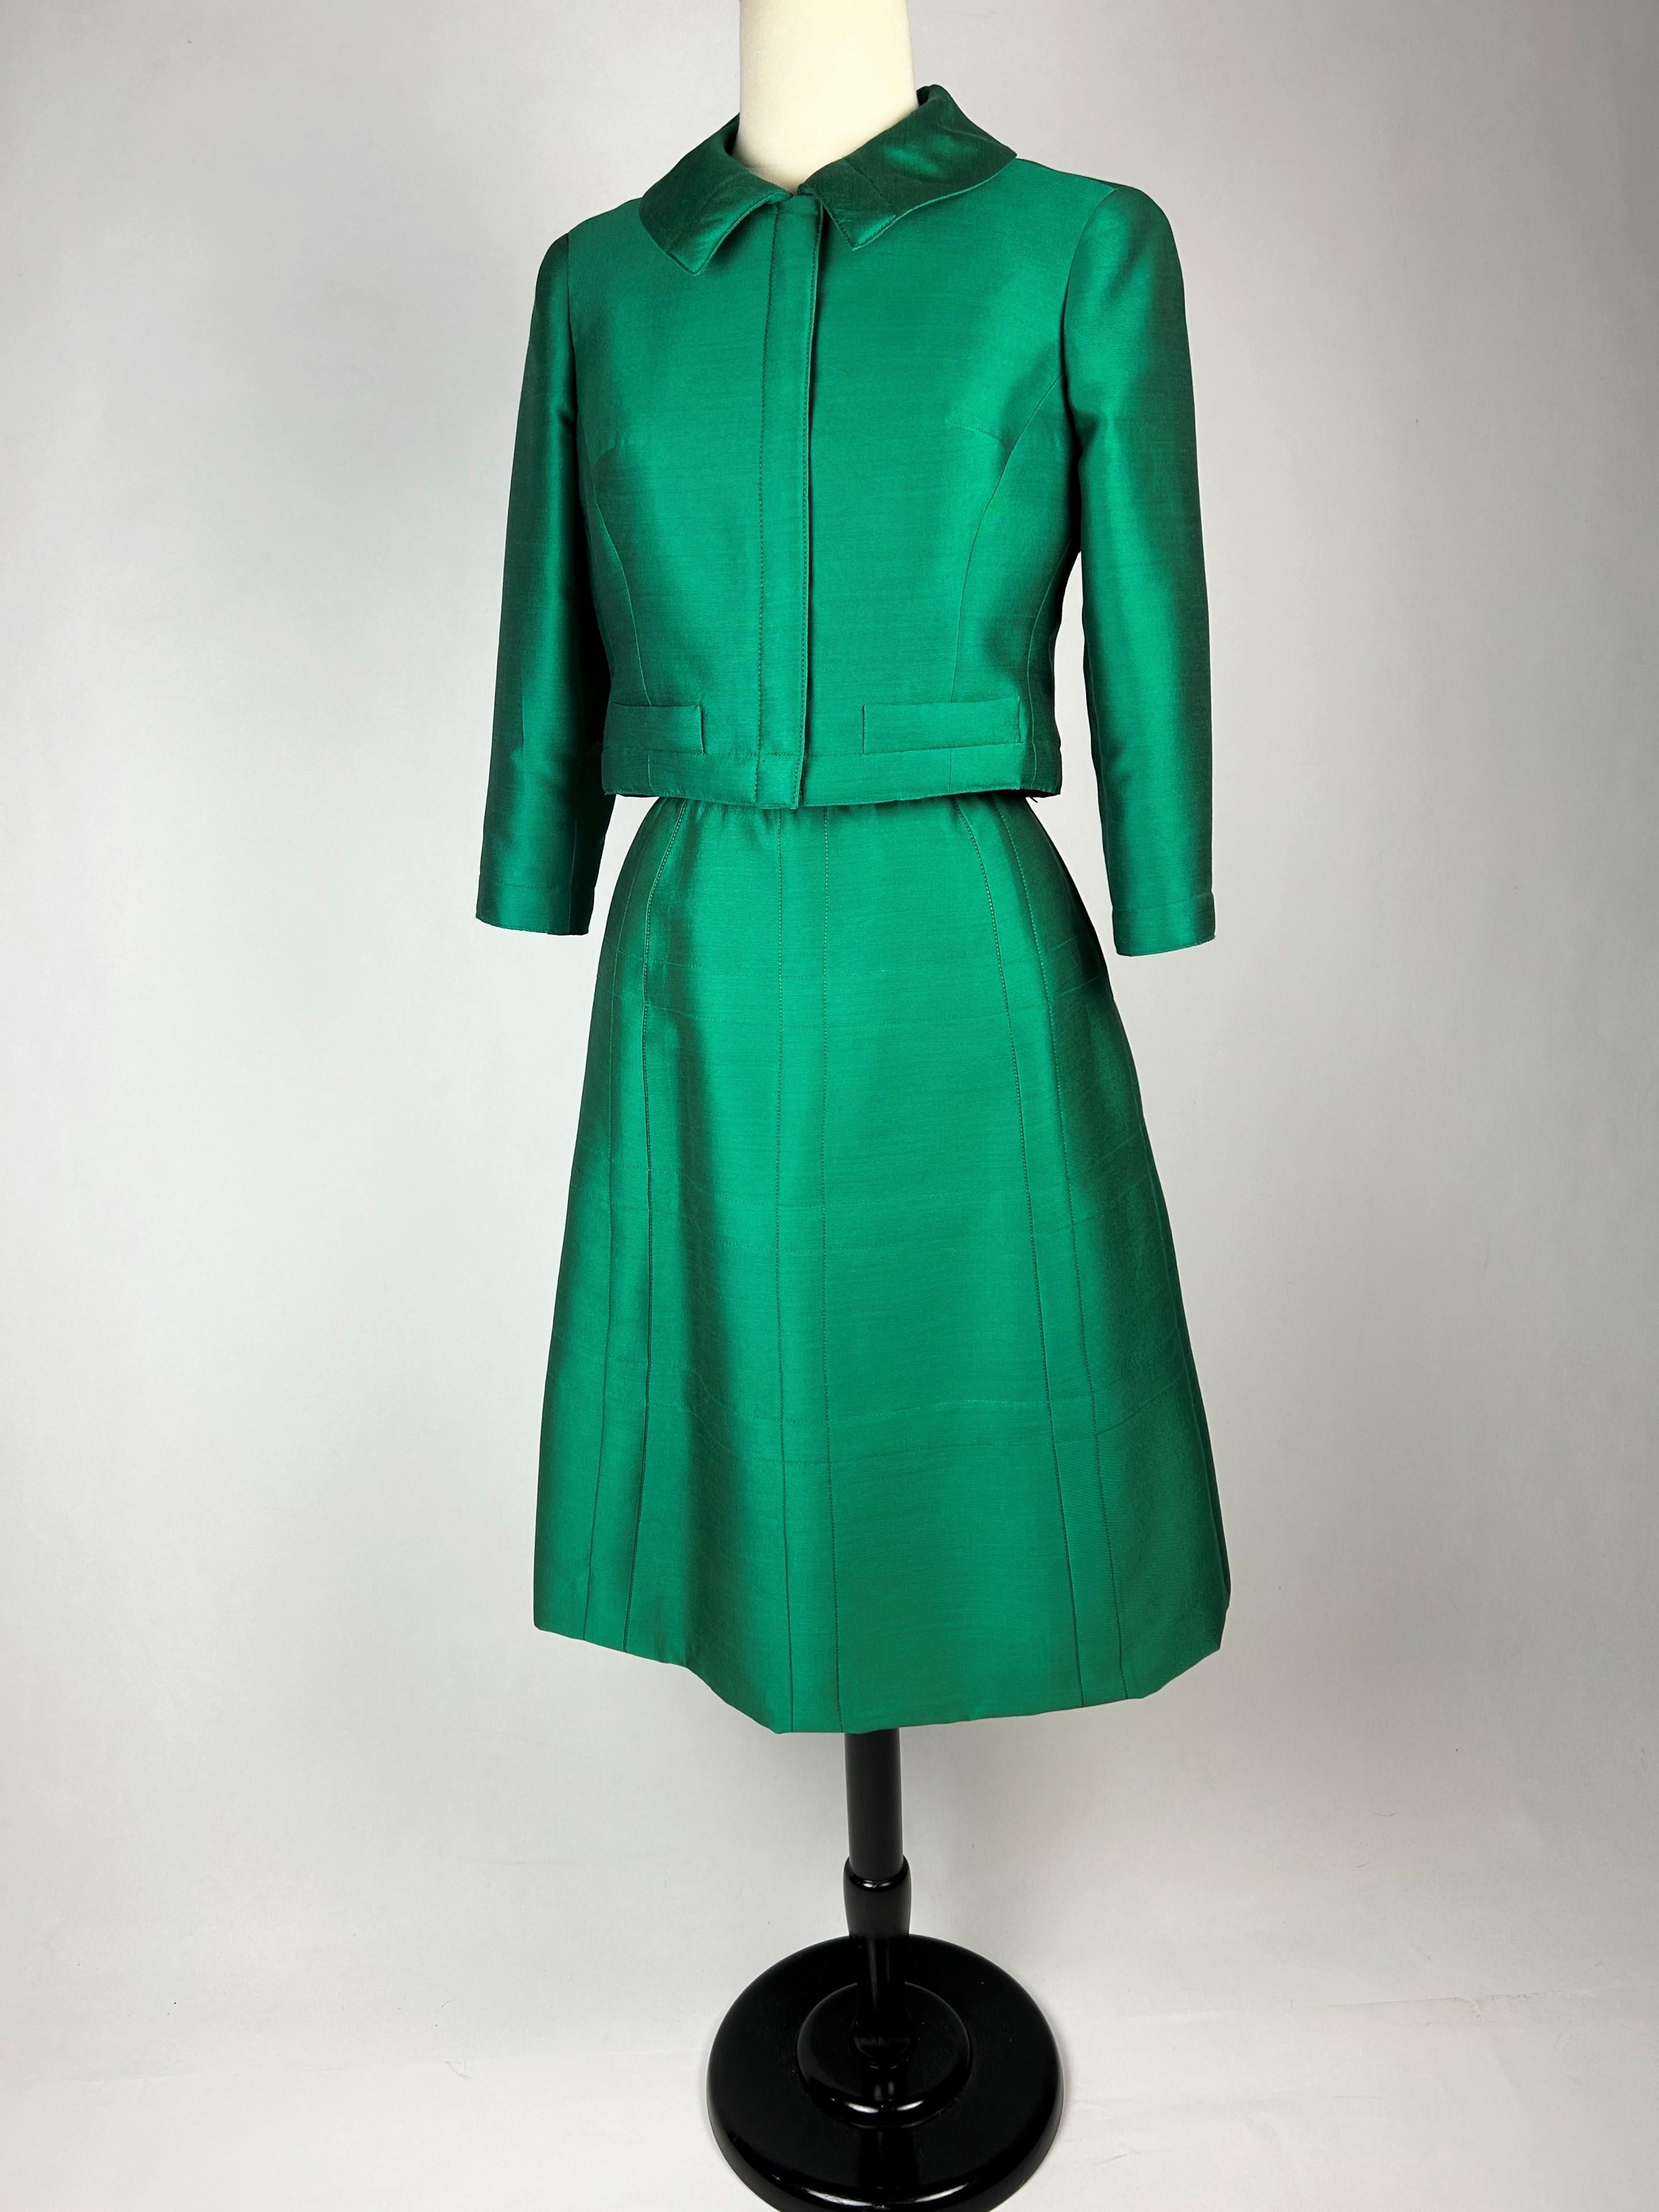 An Emerald Gazar Demi-Couture Skirt Suit by Louis Féraud Circa 1968-1972 For Sale 6